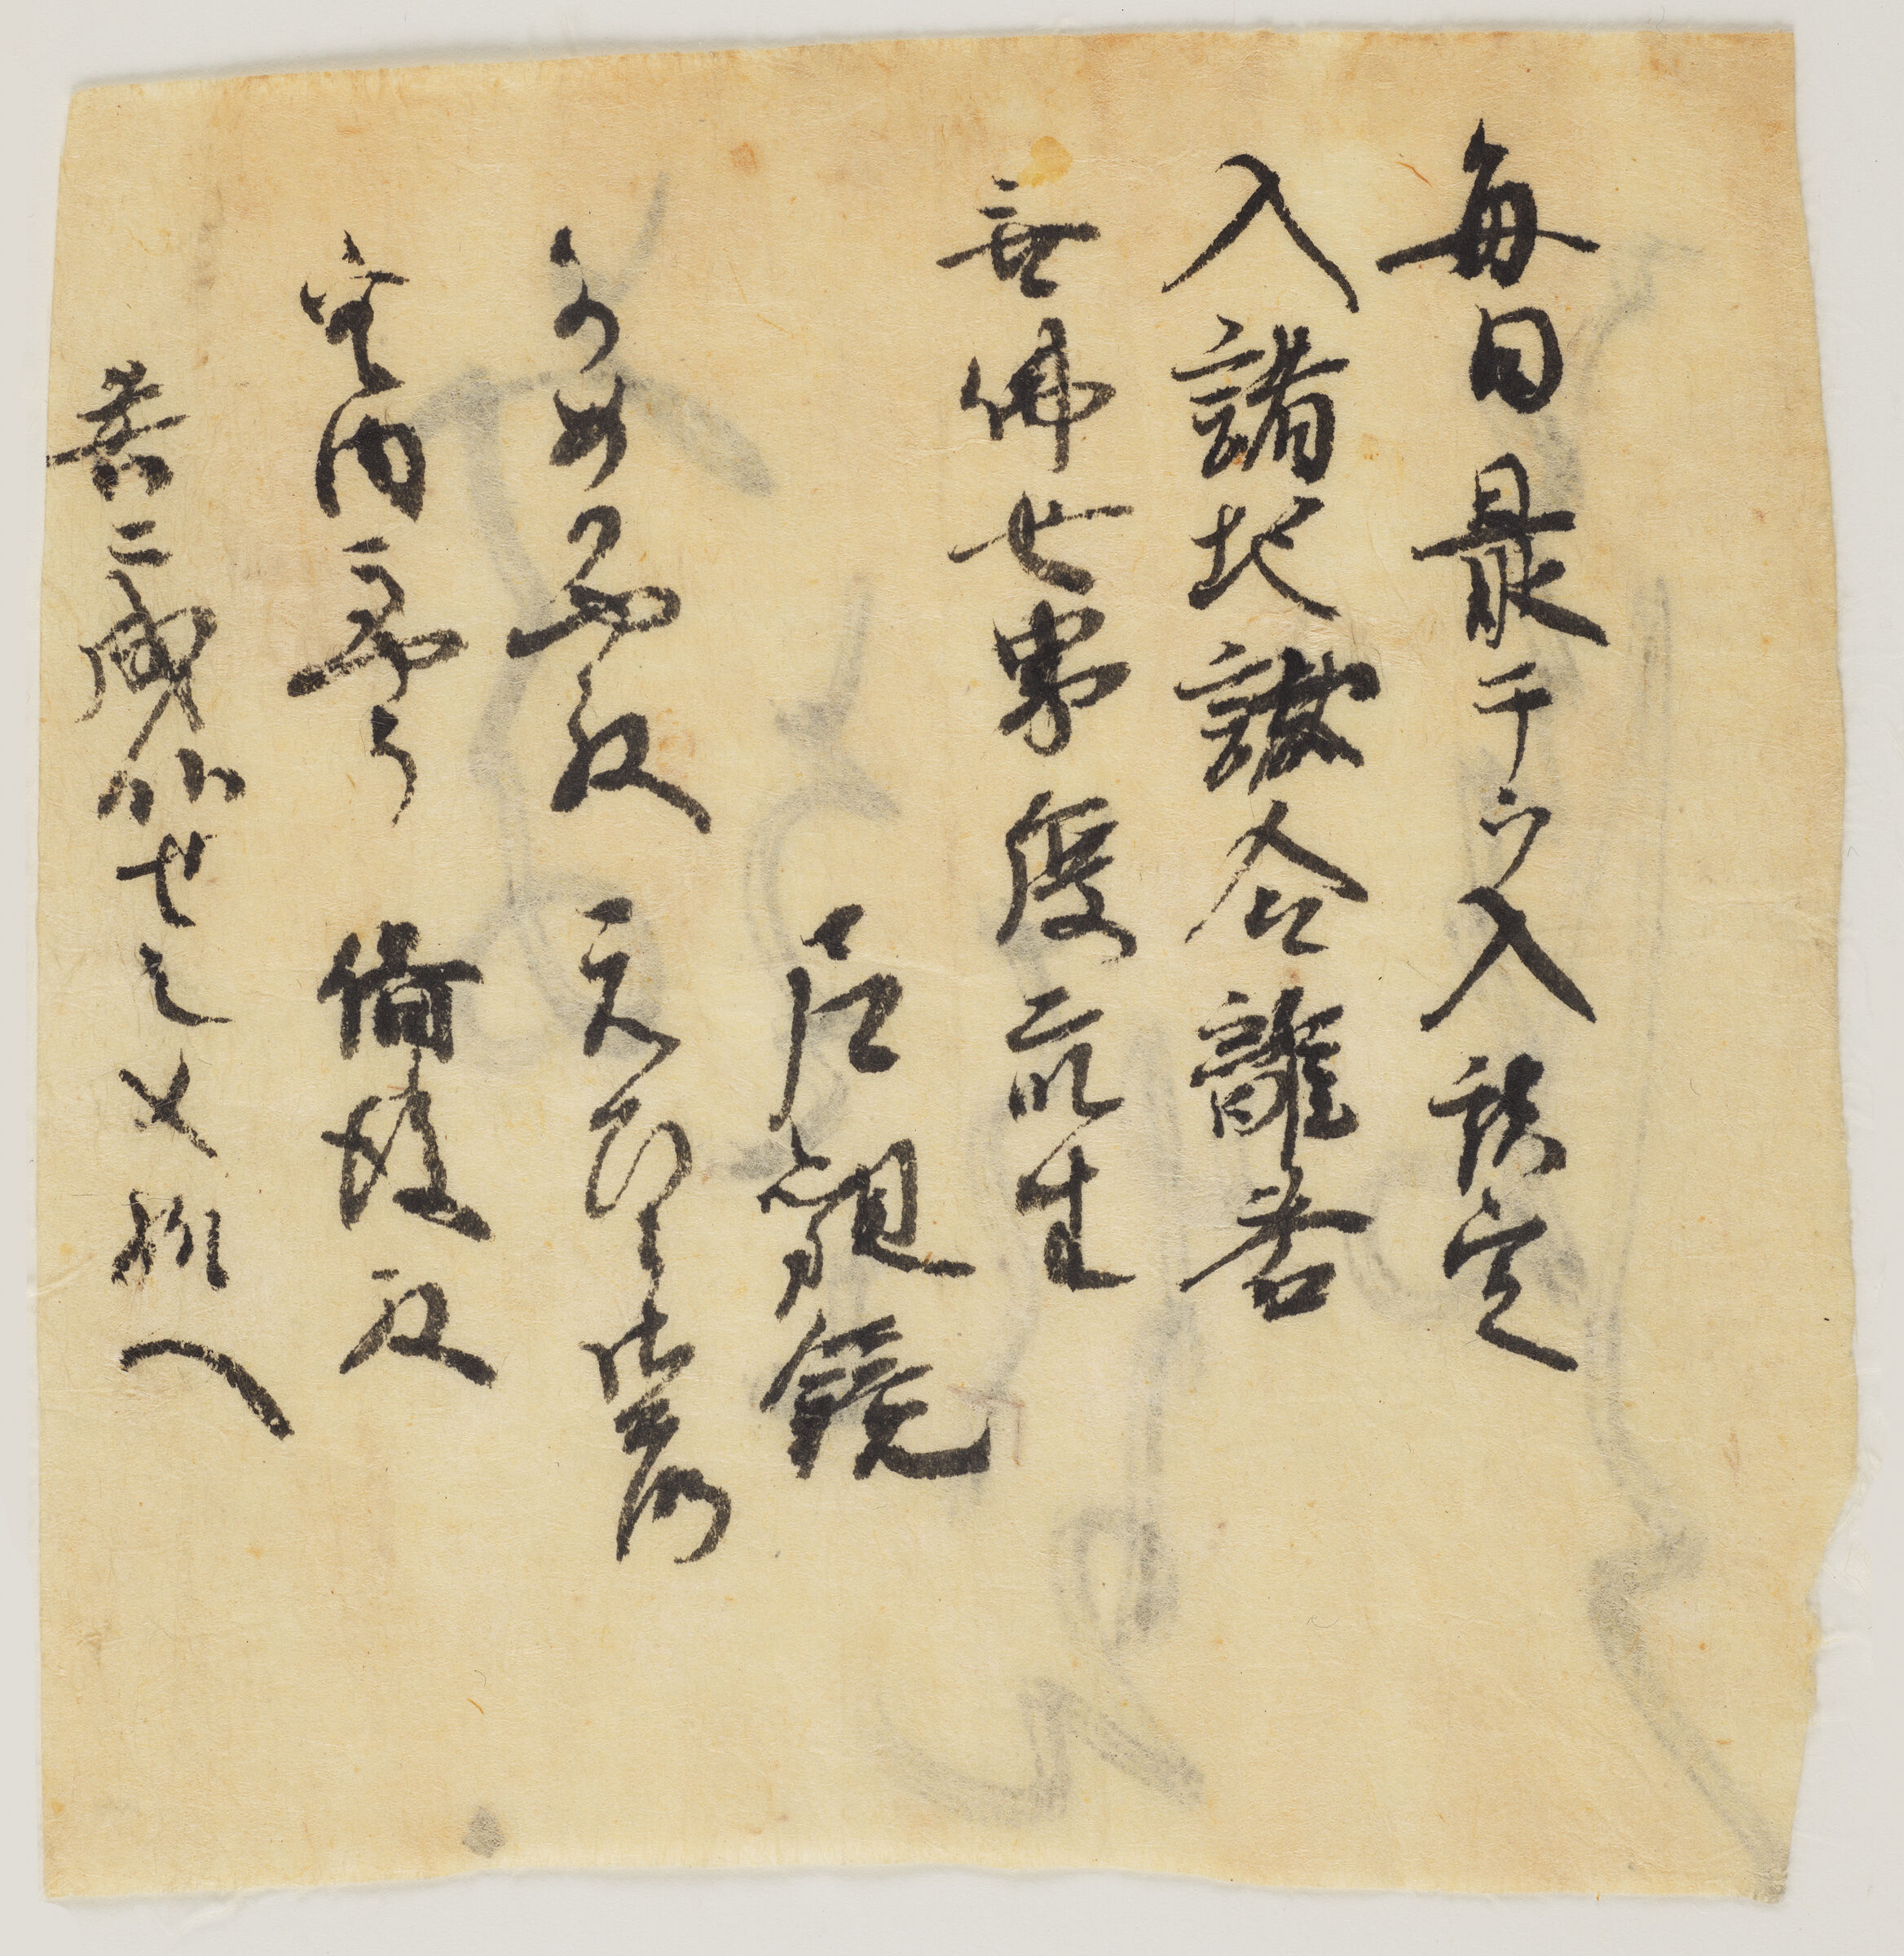 One Of Six Sheets Of Paper (Some Double-Sided) Inscribed With Religious Texts, Poems, Charms